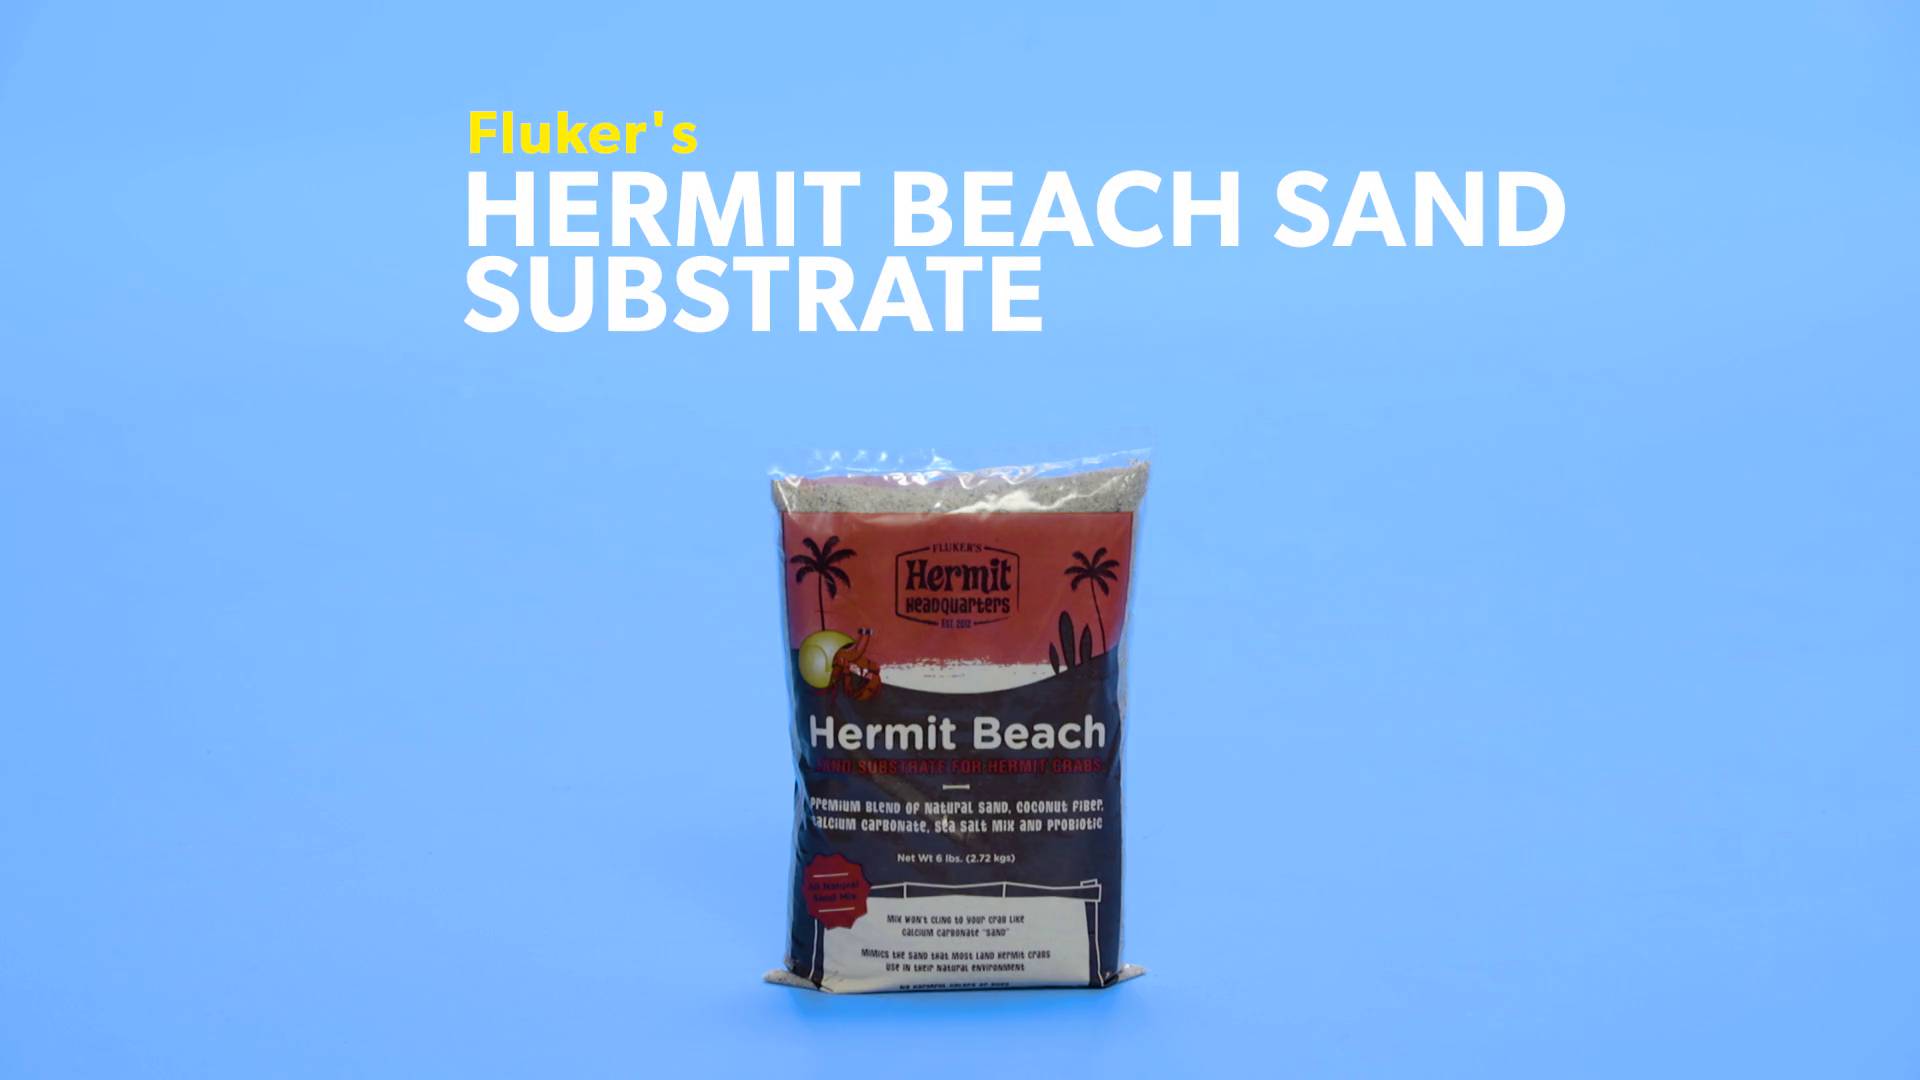 Flukers Hermit Beach Sand Substrate for Crabs 